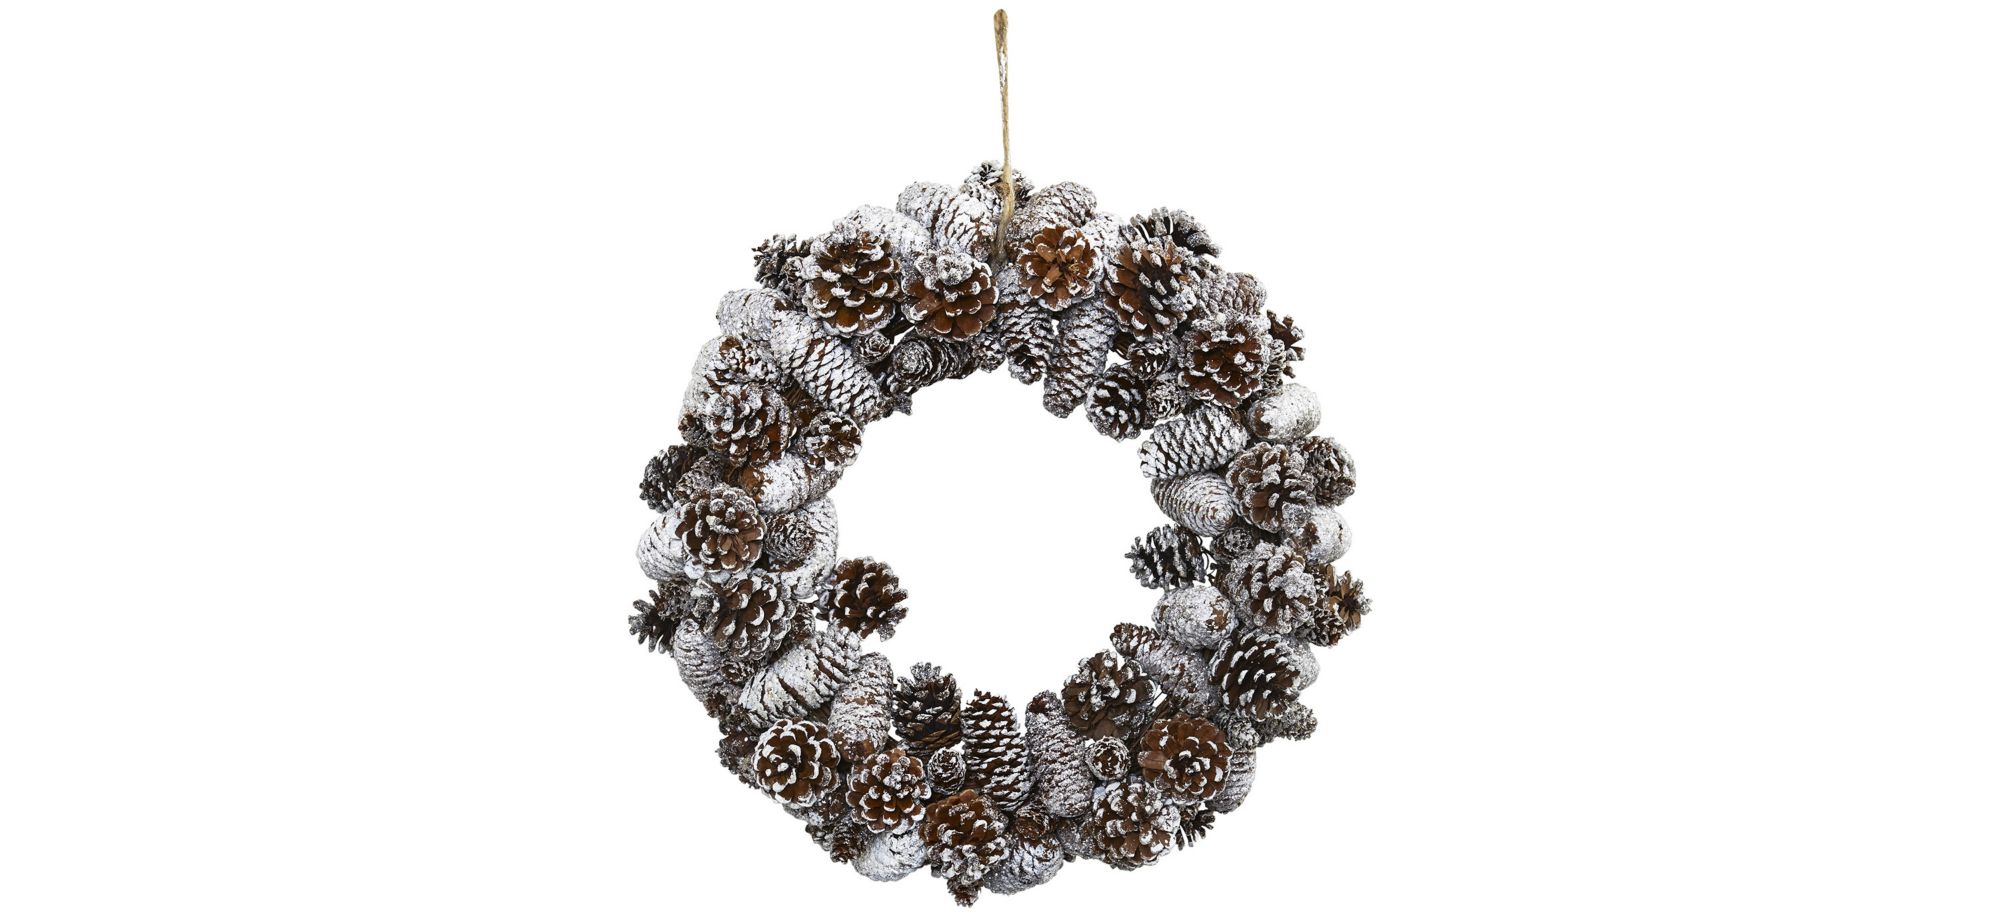 Snowy Pinecone Artificial Wreath in White by Bellanest